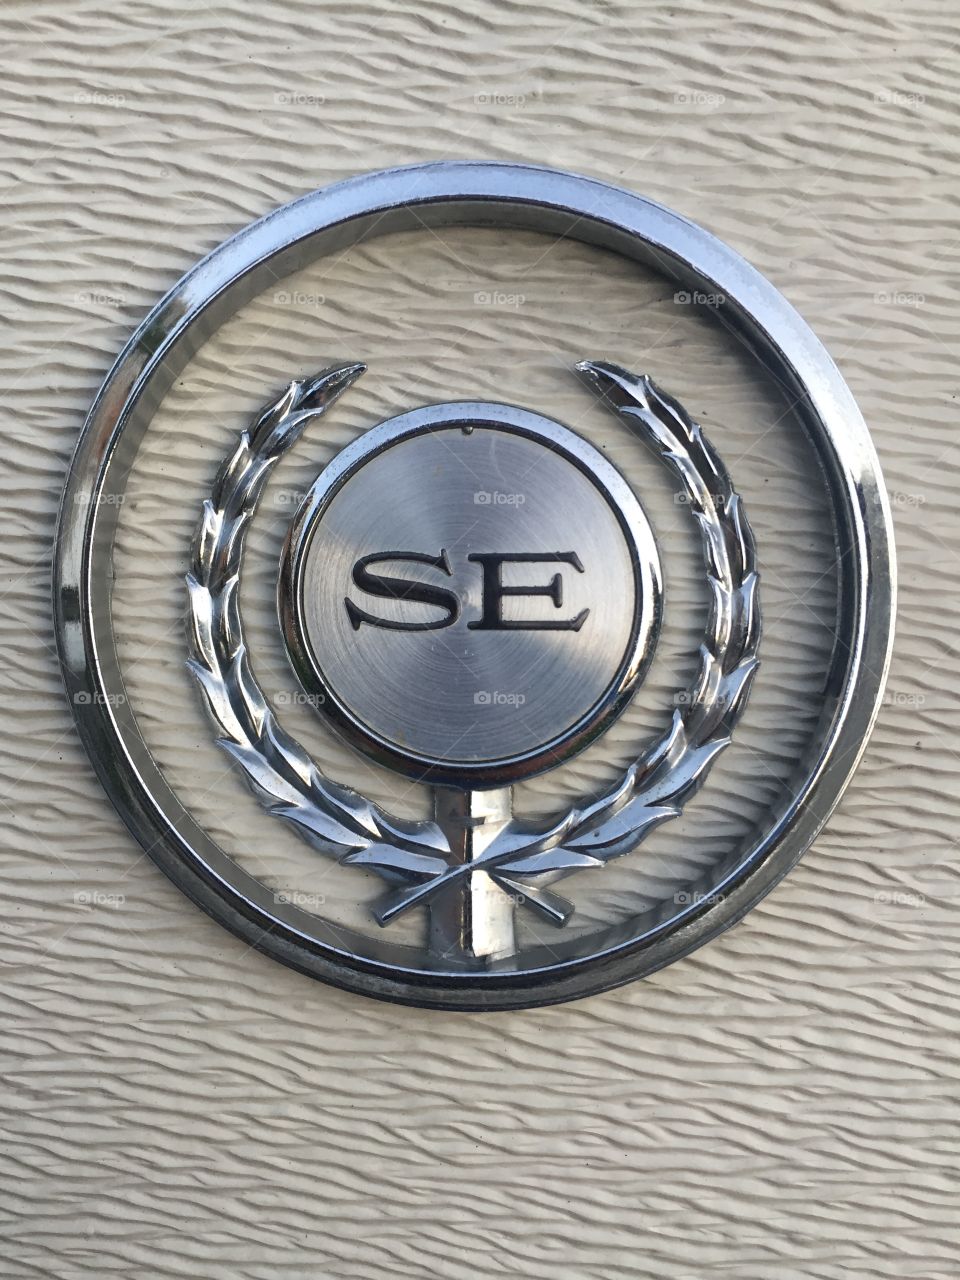 One of the logo badges on my 1974 dodge charger